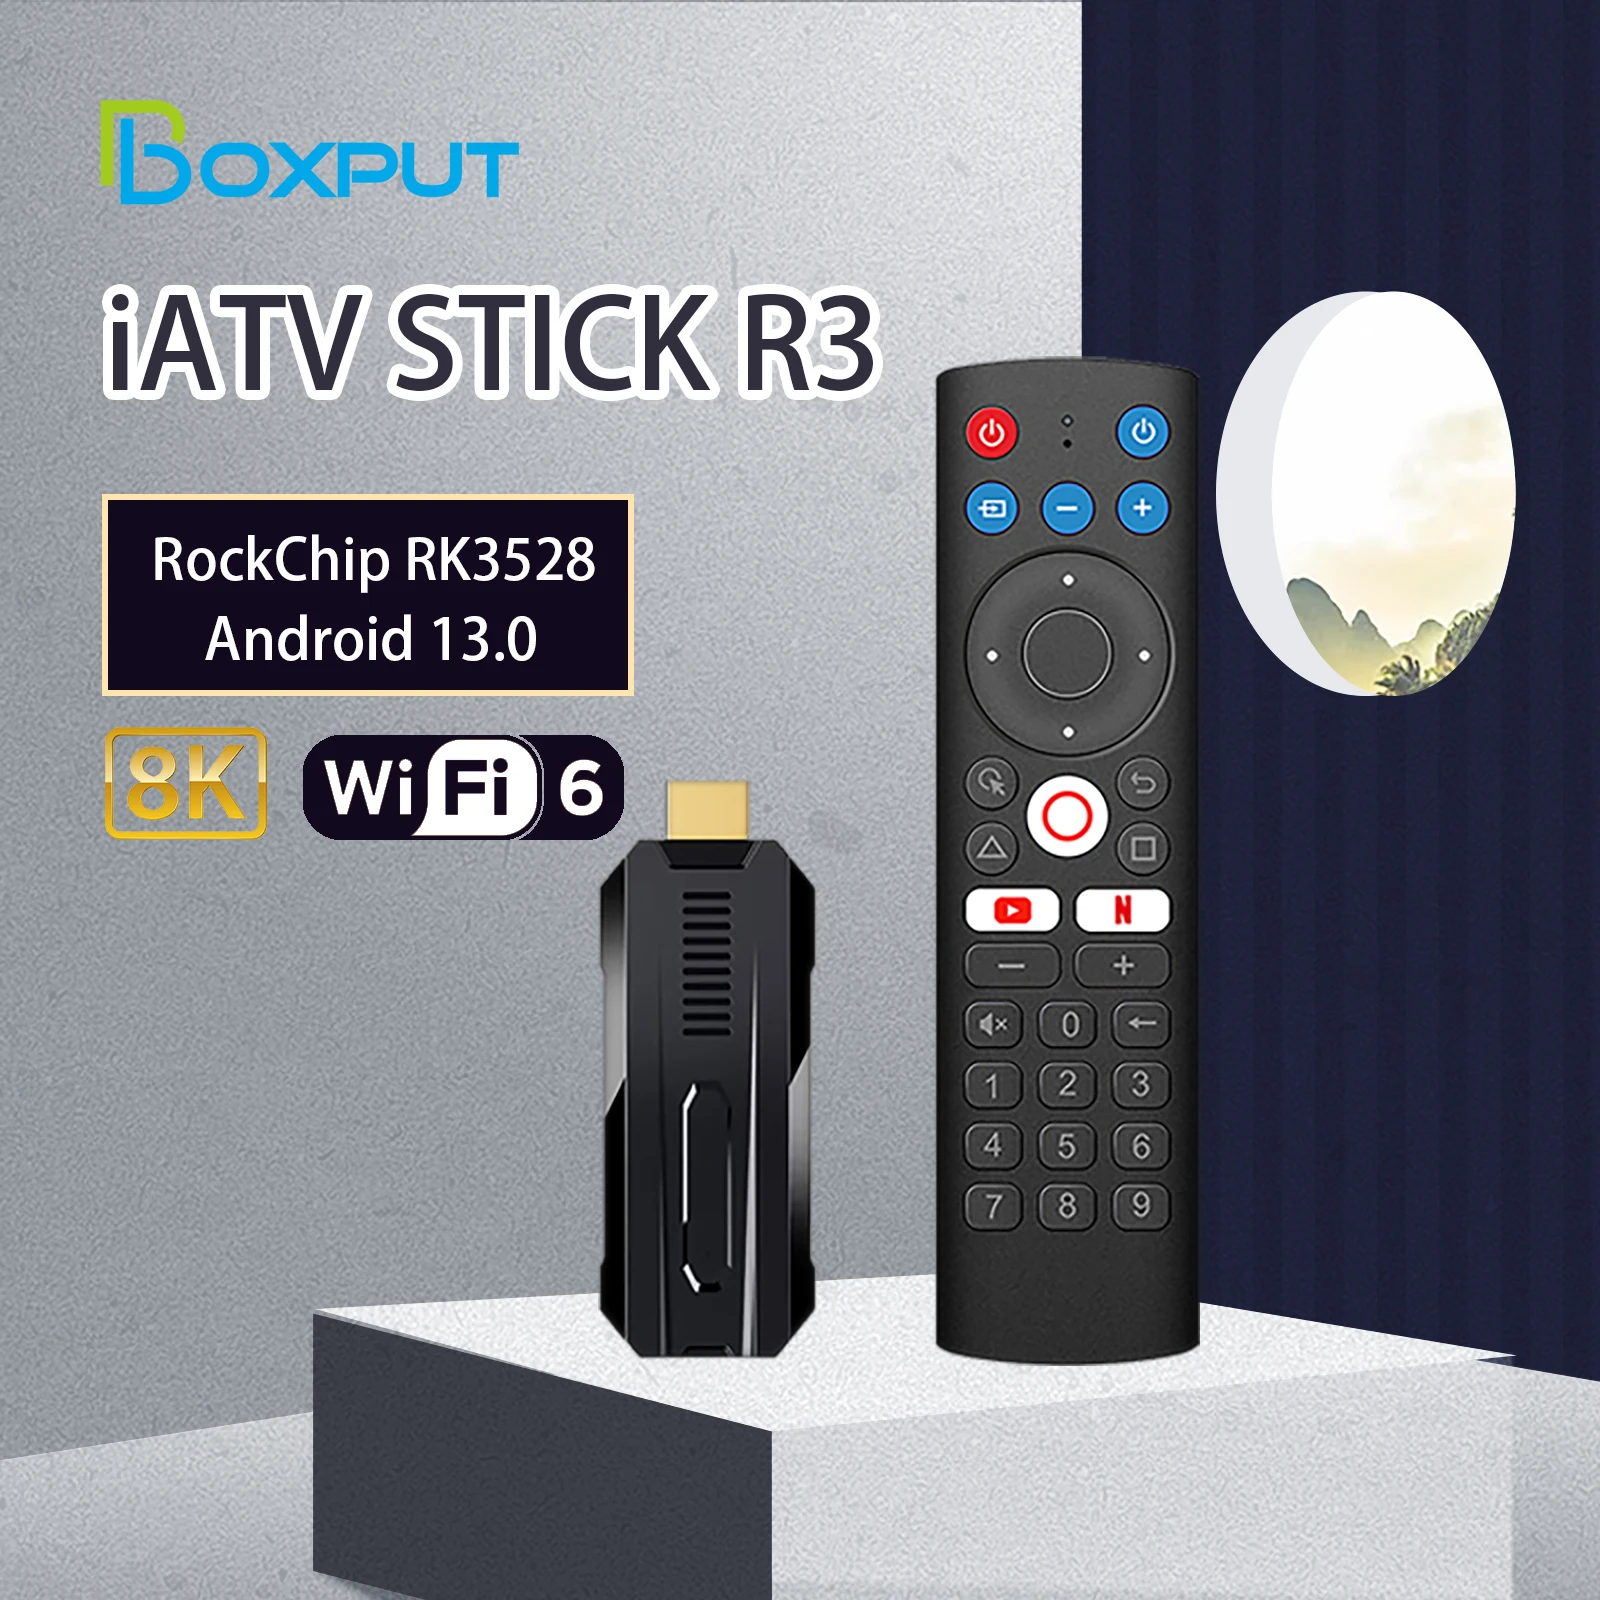 BOXPUT Android 13.0 iATV R3 Fire TV Stick RockChip RK3528 8K Portable TVbox 2.4G/5G WiFi6 BT5.0 OTG TF Slot With Screencasting outdoor portable bbq lightweight stainless steel fire pit cooking supplies indoor camping picnic charcoal grilling burner